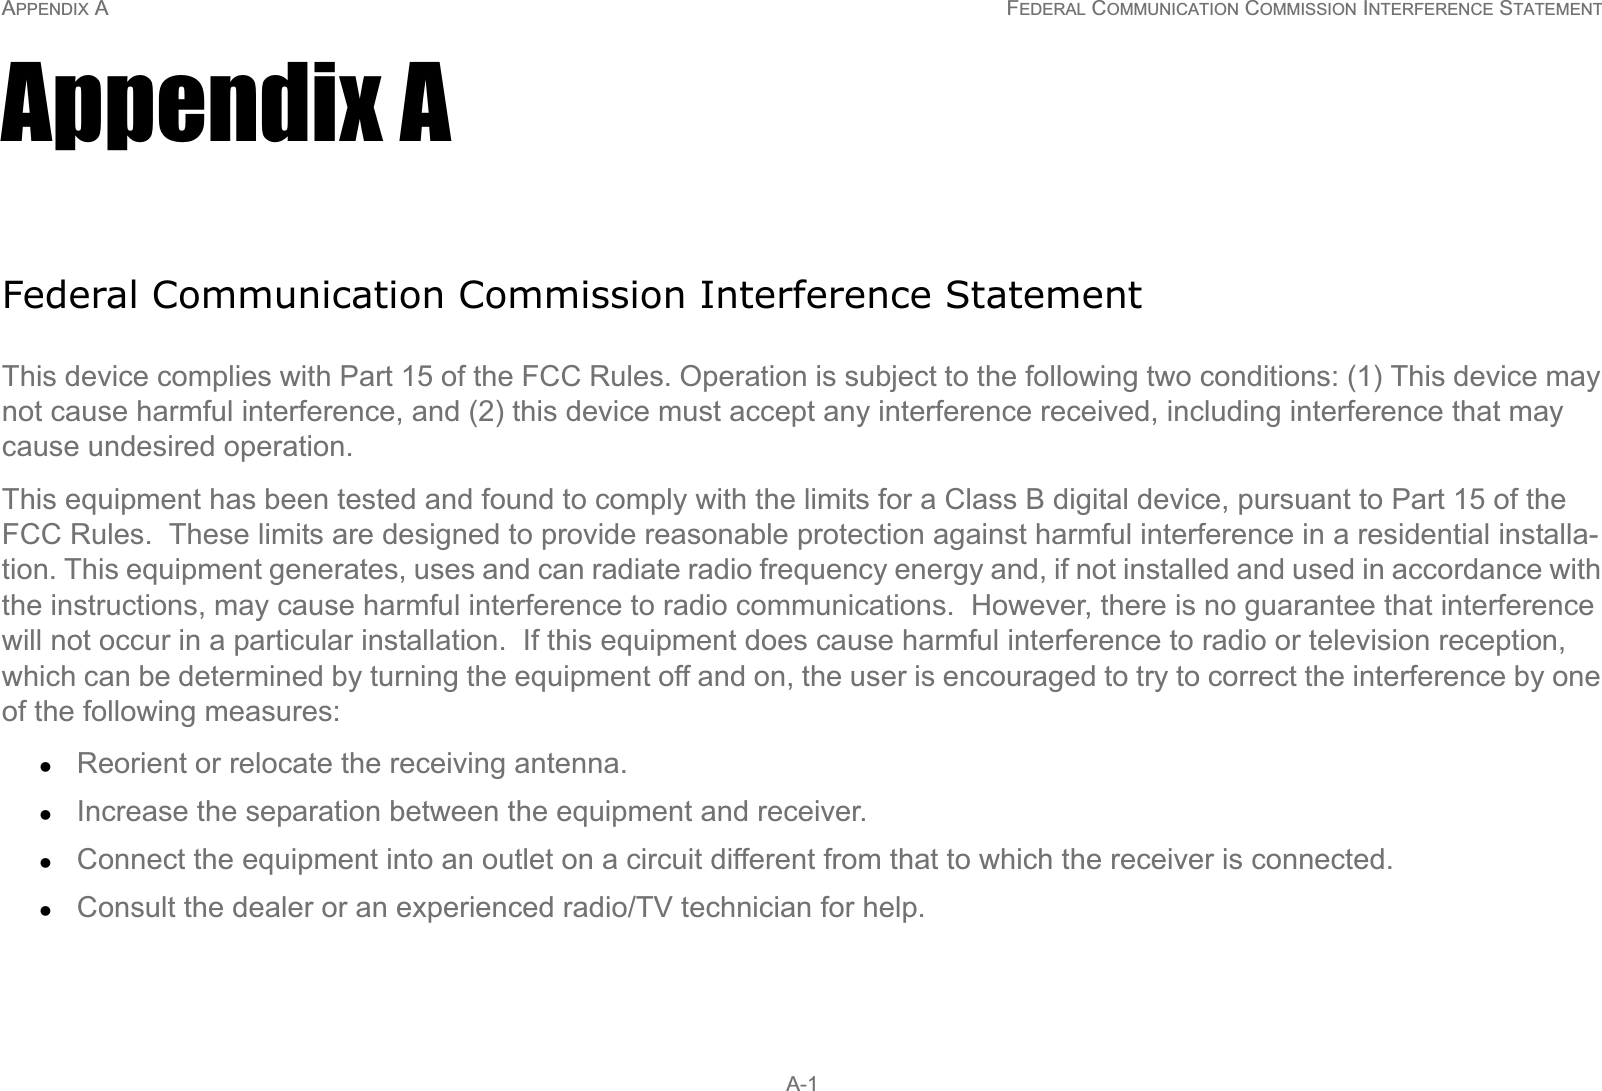 APPENDIX A FEDERAL COMMUNICATION COMMISSION INTERFERENCE STATEMENT A-1Appendix AFederal Communication Commission Interference StatementThis device complies with Part 15 of the FCC Rules. Operation is subject to the following two conditions: (1) This device may not cause harmful interference, and (2) this device must accept any interference received, including interference that may cause undesired operation.This equipment has been tested and found to comply with the limits for a Class B digital device, pursuant to Part 15 of the FCC Rules.  These limits are designed to provide reasonable protection against harmful interference in a residential installa-tion. This equipment generates, uses and can radiate radio frequency energy and, if not installed and used in accordance with the instructions, may cause harmful interference to radio communications.  However, there is no guarantee that interference will not occur in a particular installation.  If this equipment does cause harmful interference to radio or television reception, which can be determined by turning the equipment off and on, the user is encouraged to try to correct the interference by one of the following measures:zReorient or relocate the receiving antenna.zIncrease the separation between the equipment and receiver.zConnect the equipment into an outlet on a circuit different from that to which the receiver is connected.zConsult the dealer or an experienced radio/TV technician for help.